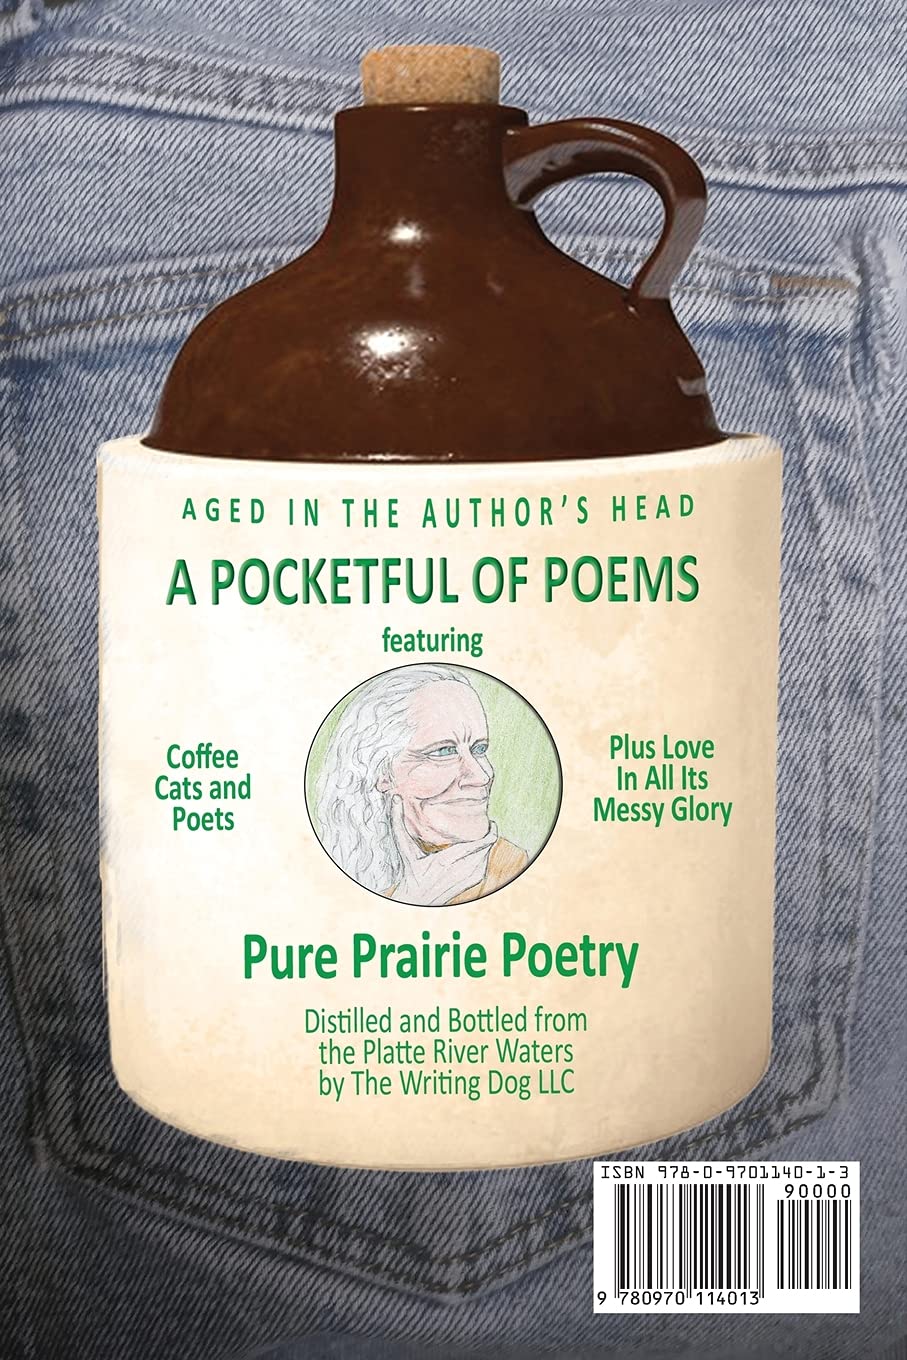 Back cover showing old whiskey jug with caricature of author, pure prairie poetry aged in the author's head. Coffee, cats and poets, plus love in all its messy glory. Distilled and bottled from the platte river waters by the writing dog llc